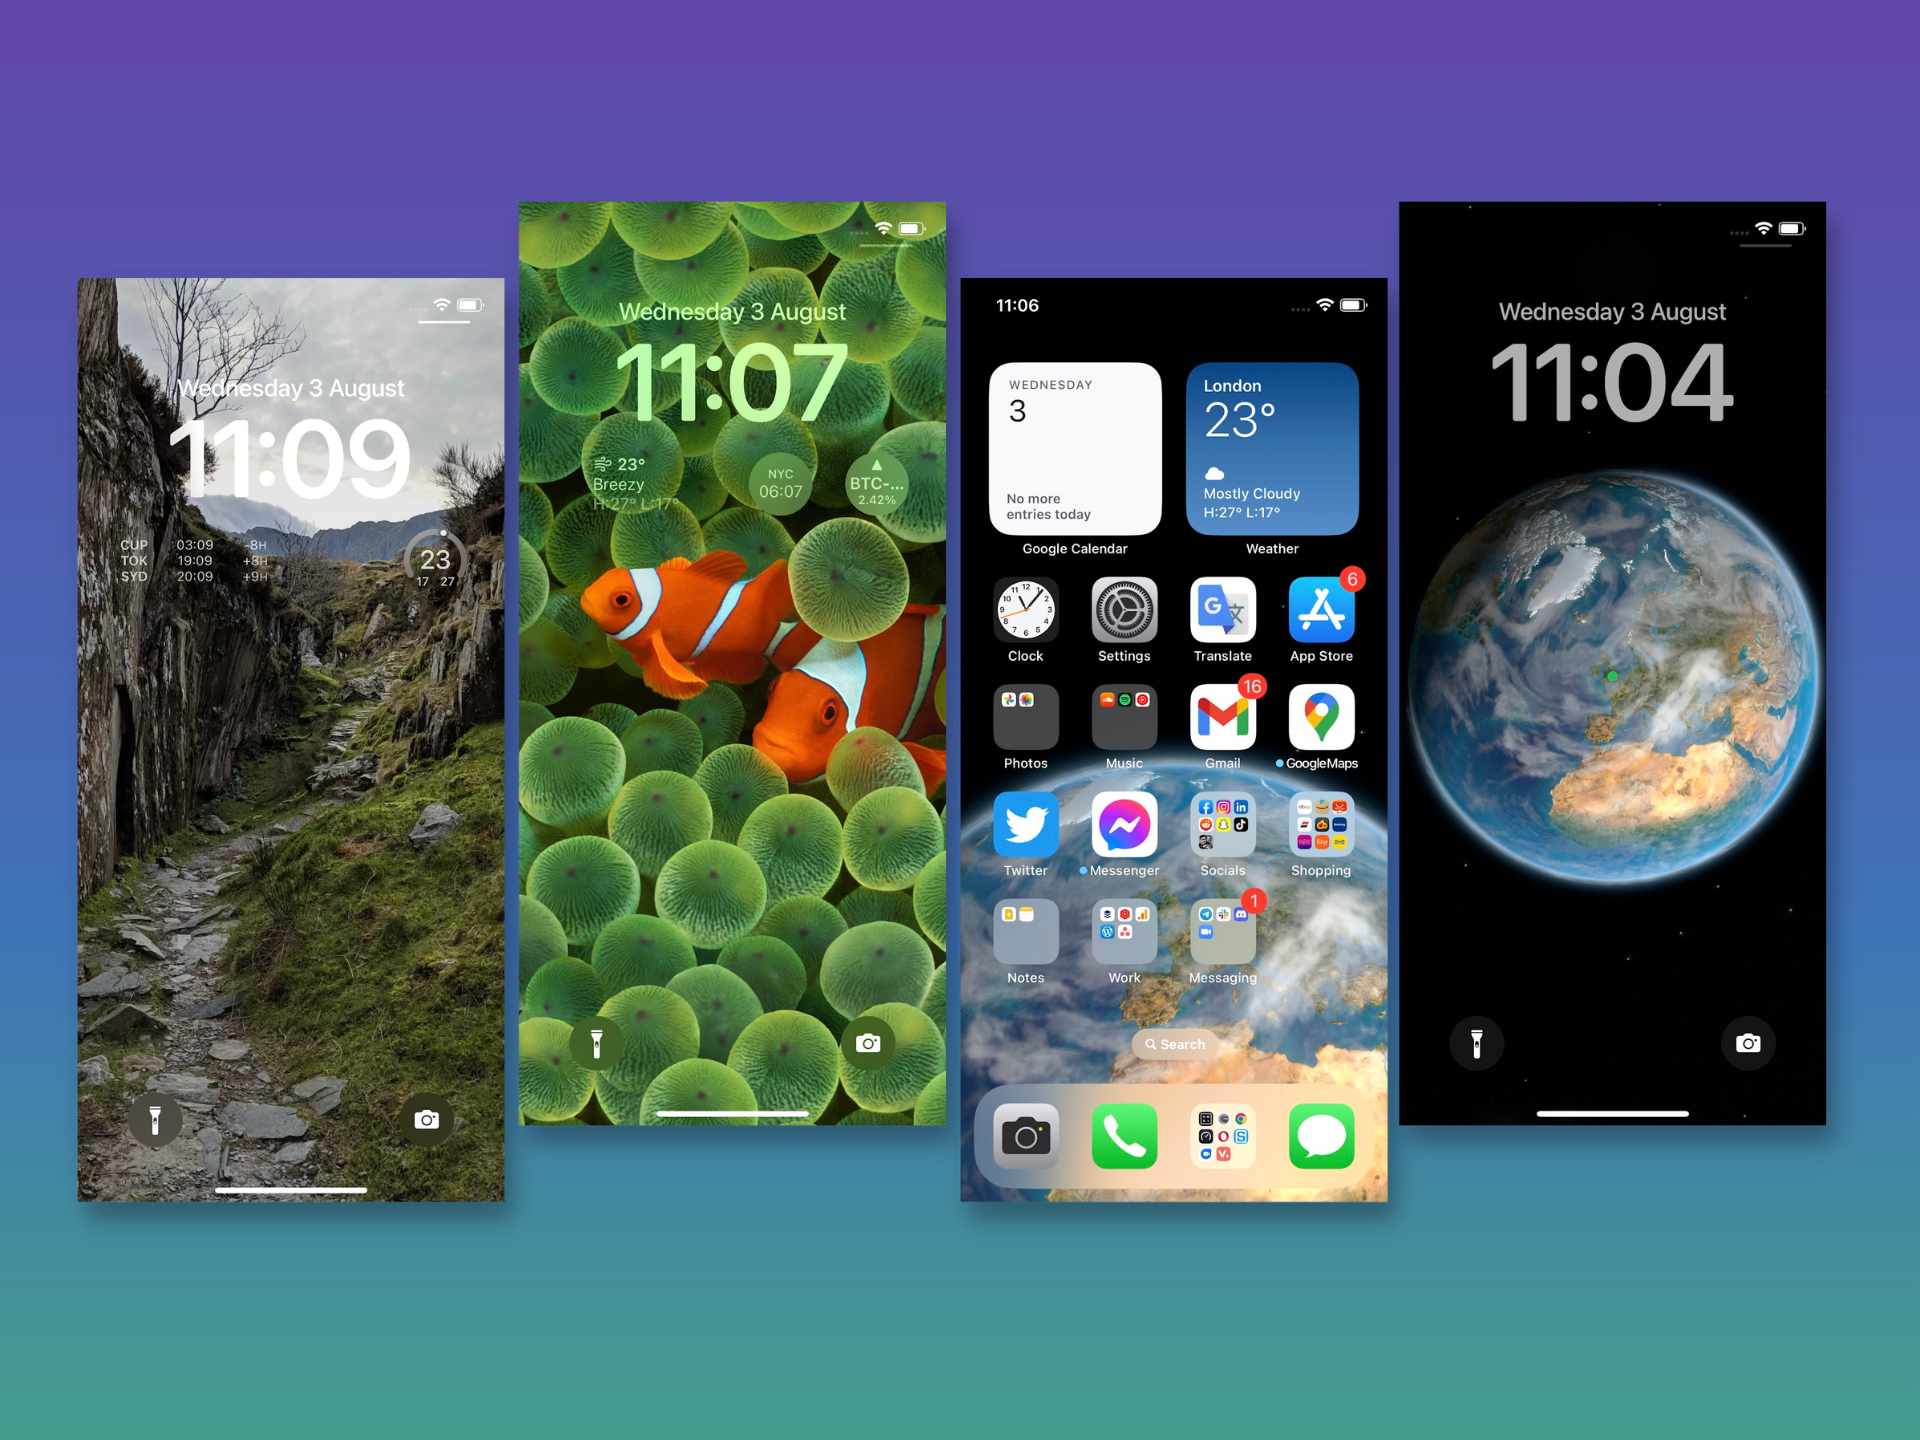 How to customize your iPhone home screen and lockscreen on iOS